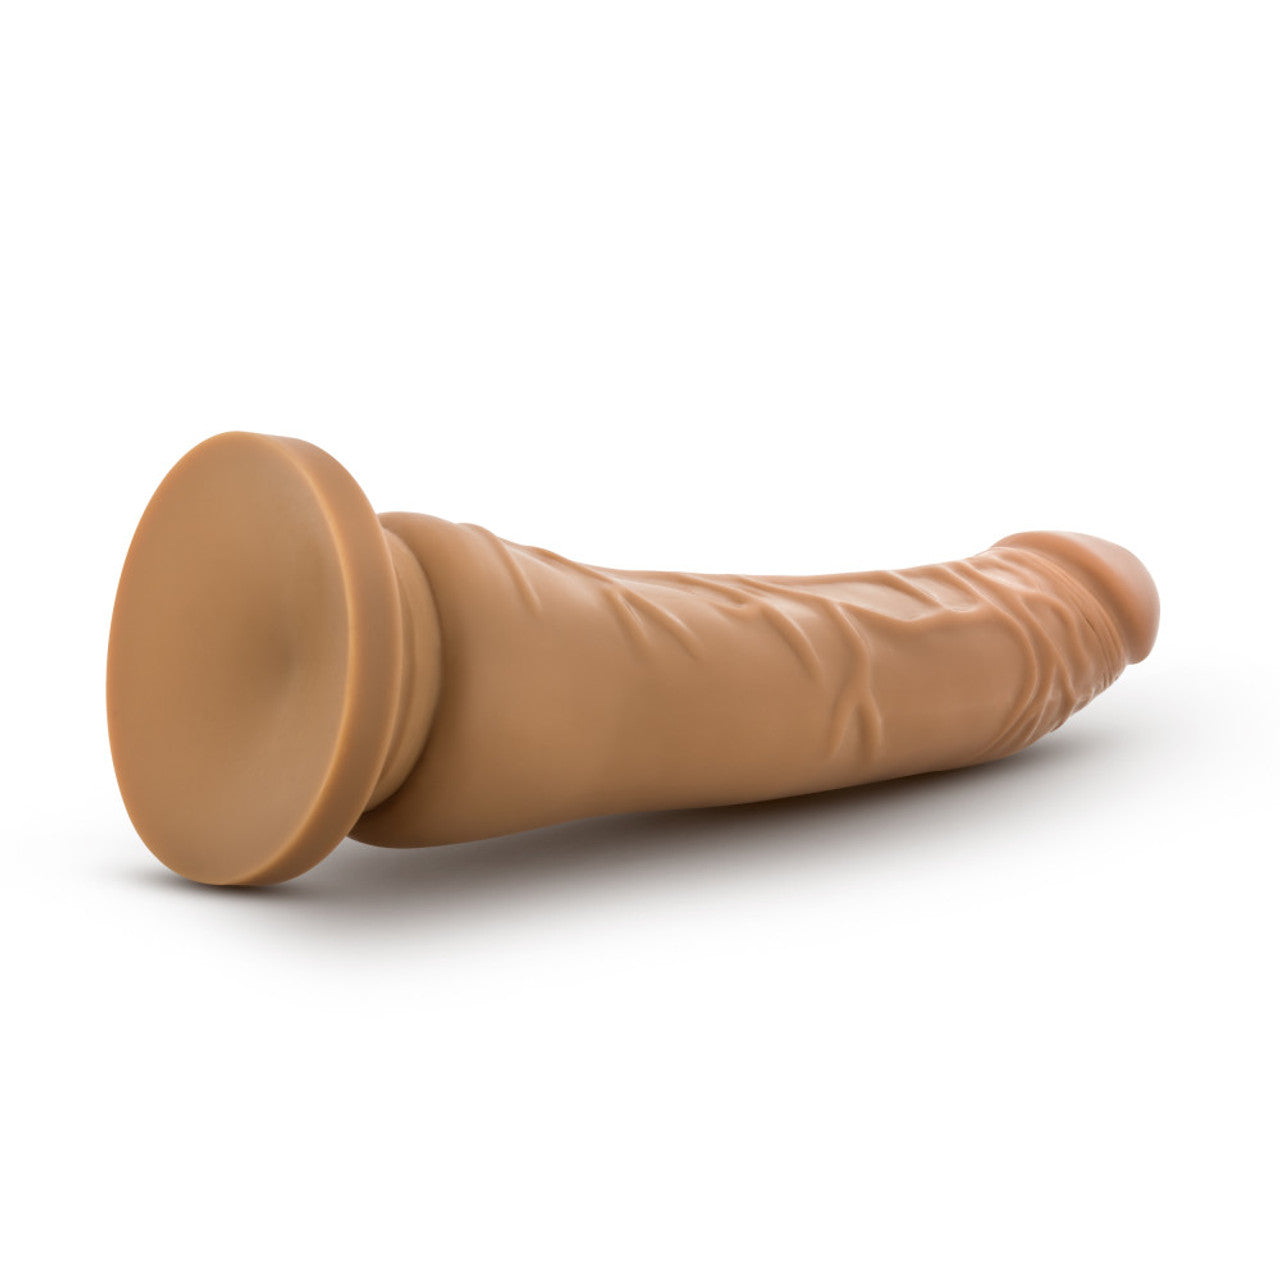 8 Inch Dong with Suction Cup - Mocha - Thorn & Feather Sex Toy Canada